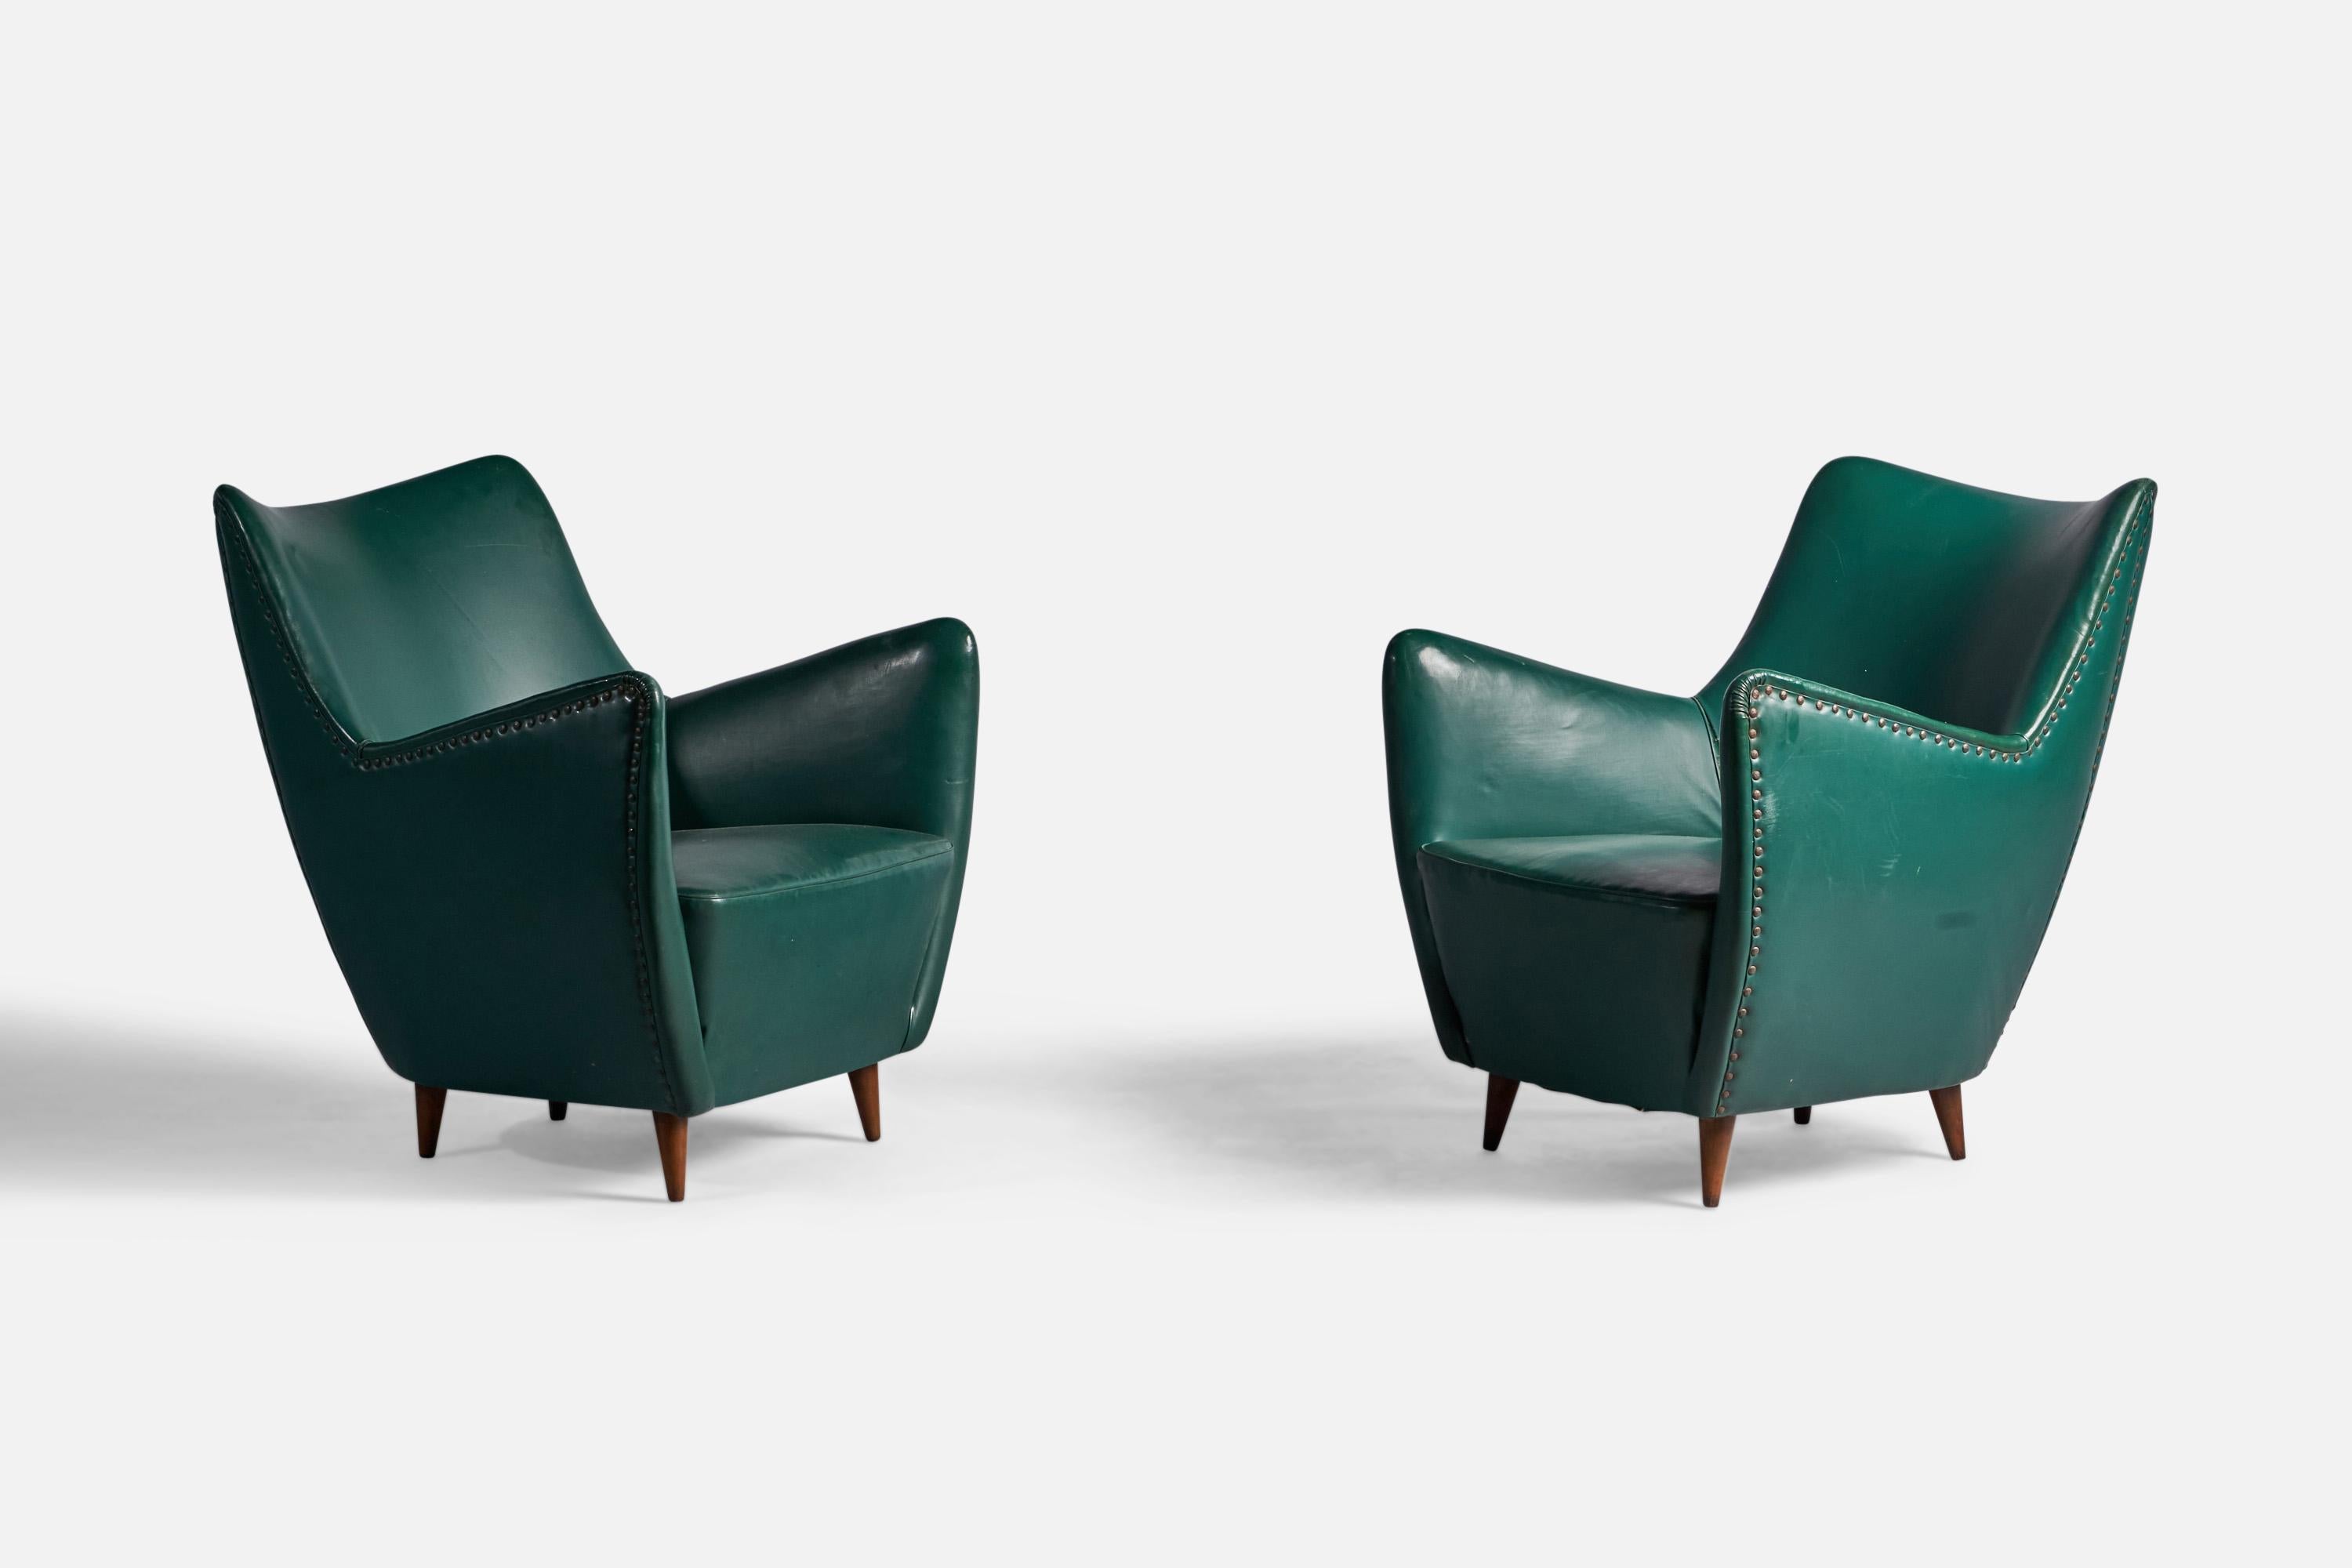 A pair of green vinyl wood and brass lounge chairs, designed by Guglielmo Veronesi and produced by ISA Bergamo, Italy, 1950s.

Seat height: 16.5